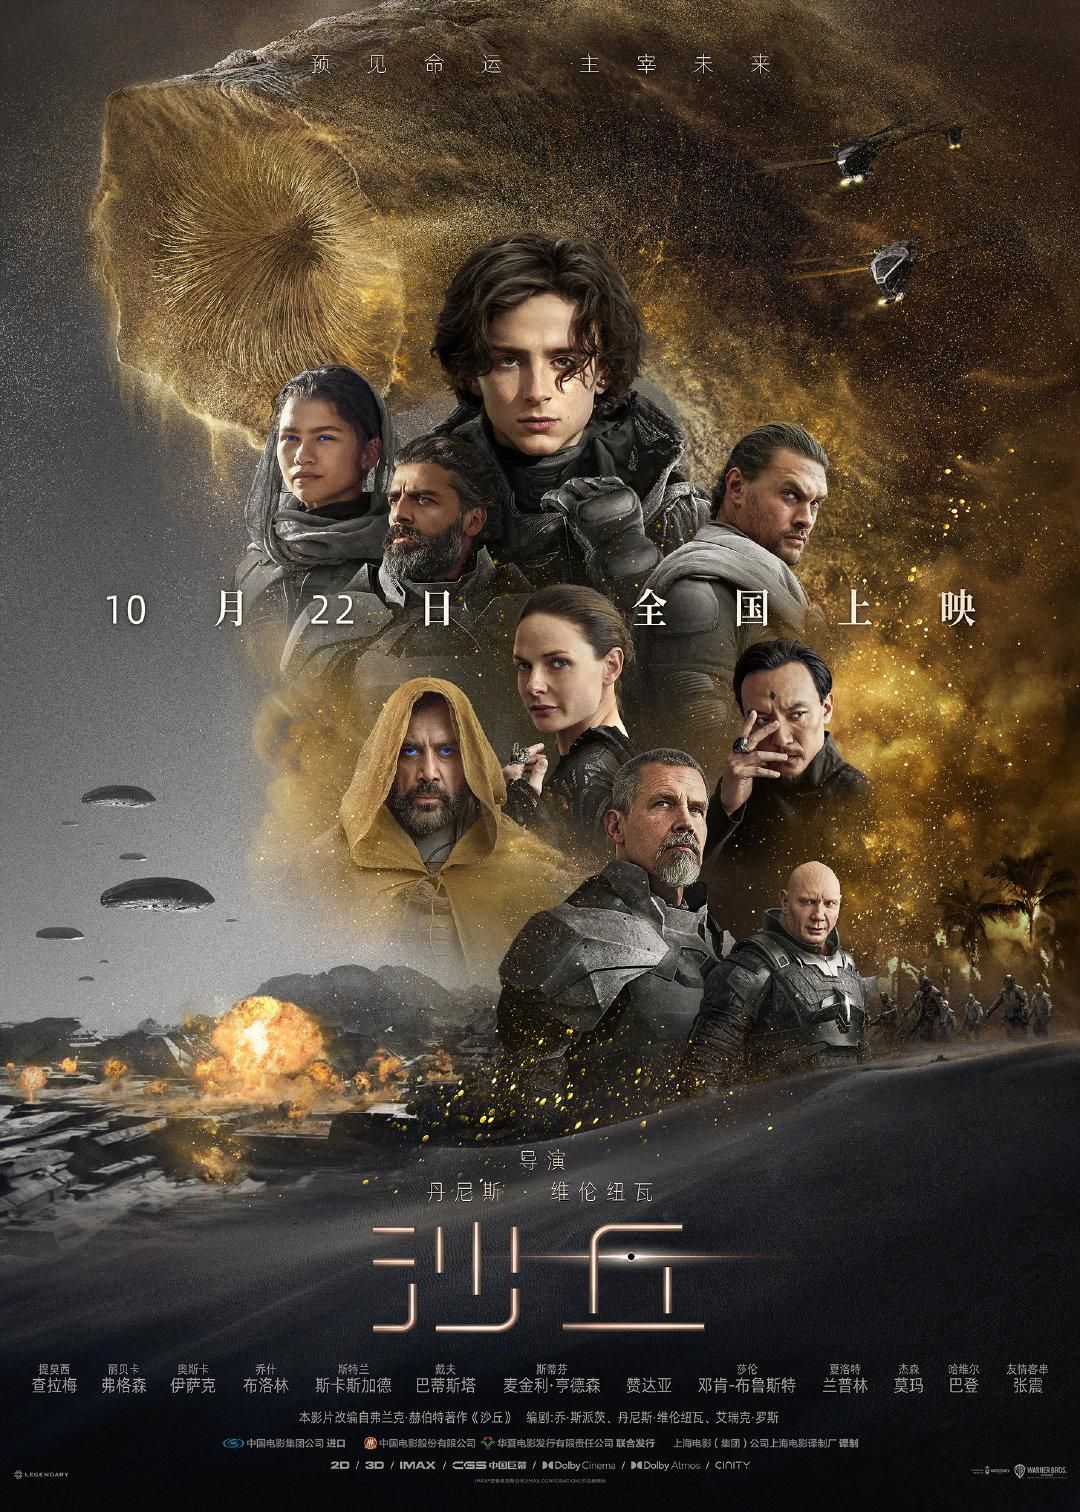 Chinese sandworms and explosions Dune poster